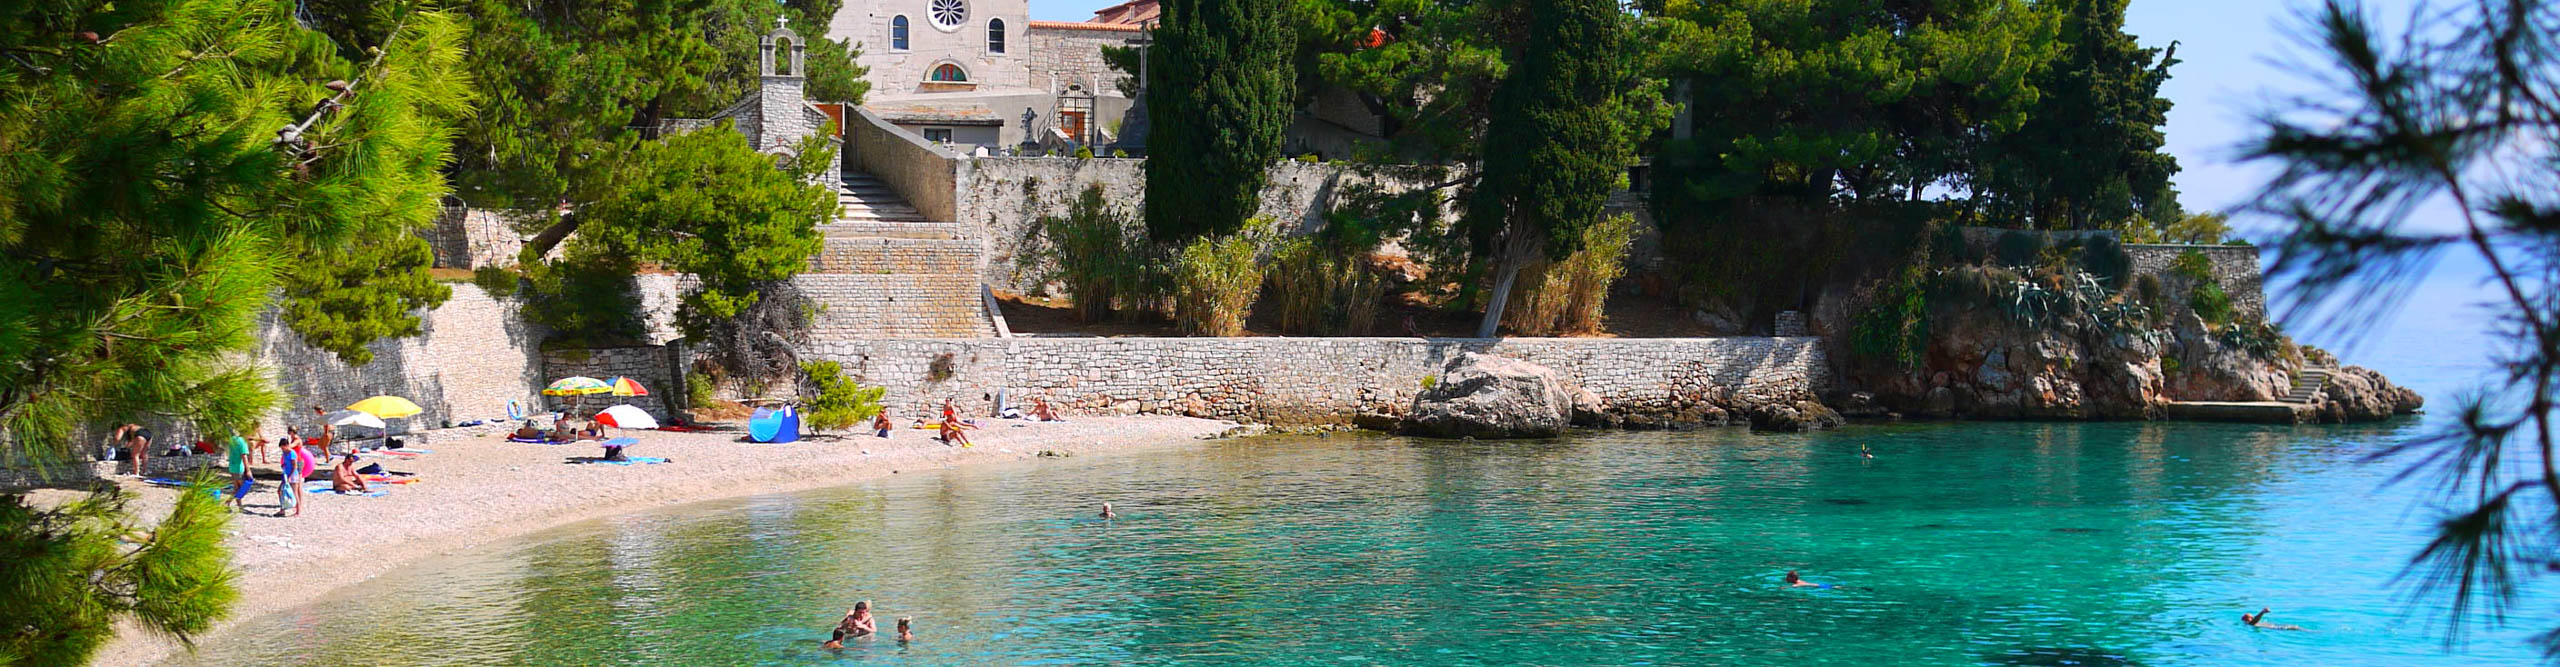 People swimming in bay with clear blue water, Croatia